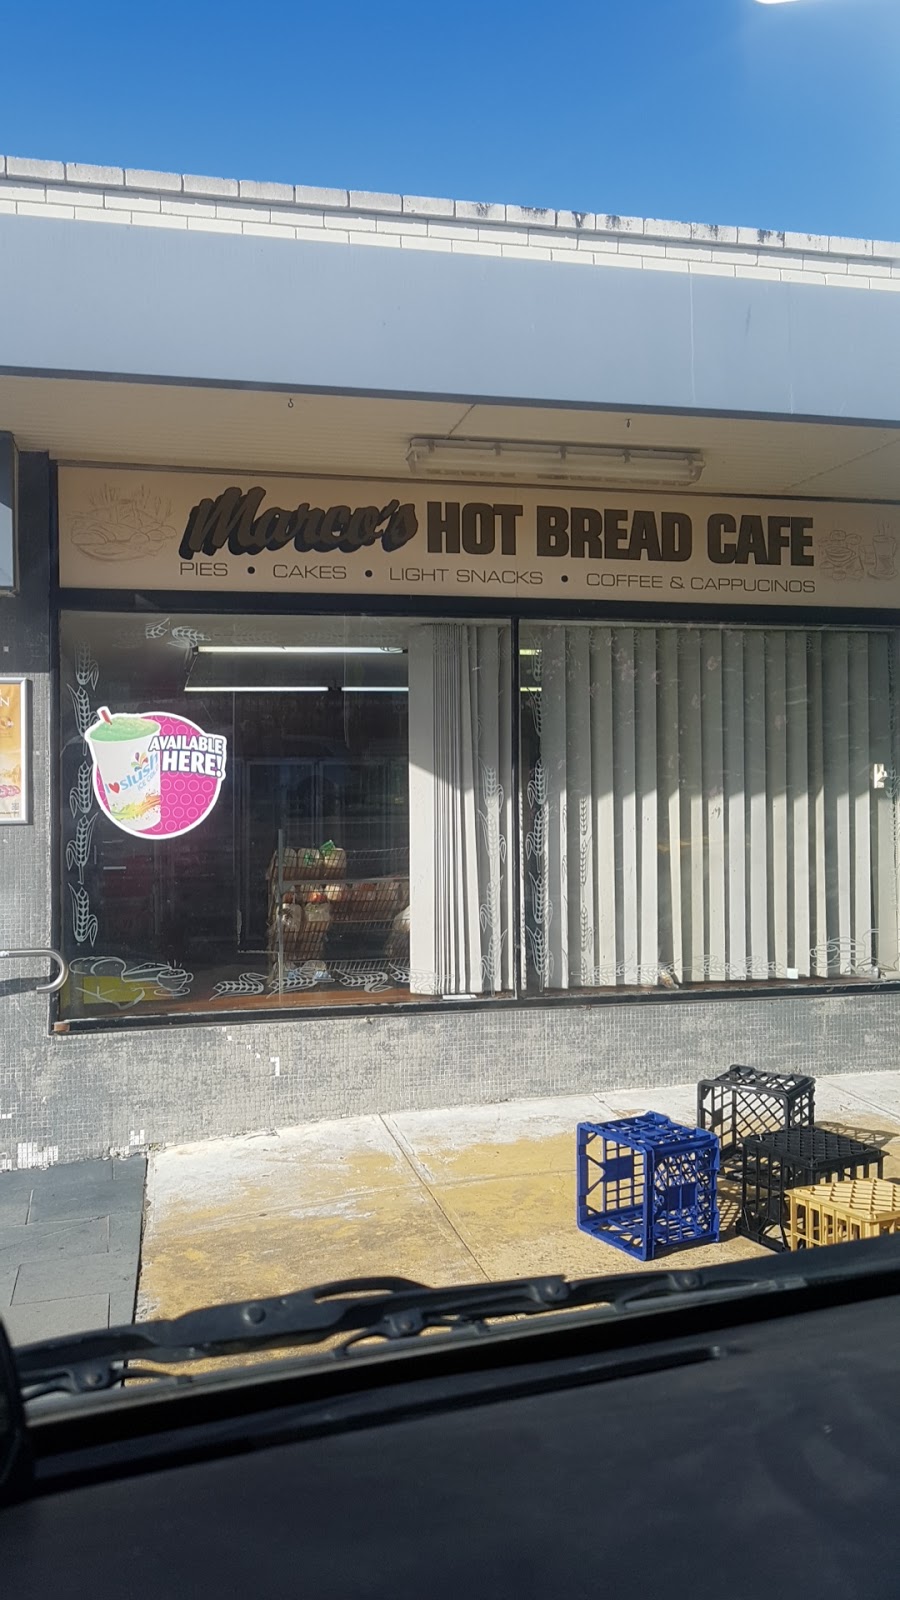 Marcos Hot Bread Cafe | cafe | 276 Malton Rd, North Epping NSW 2121, Australia | 0298694822 OR +61 2 9869 4822